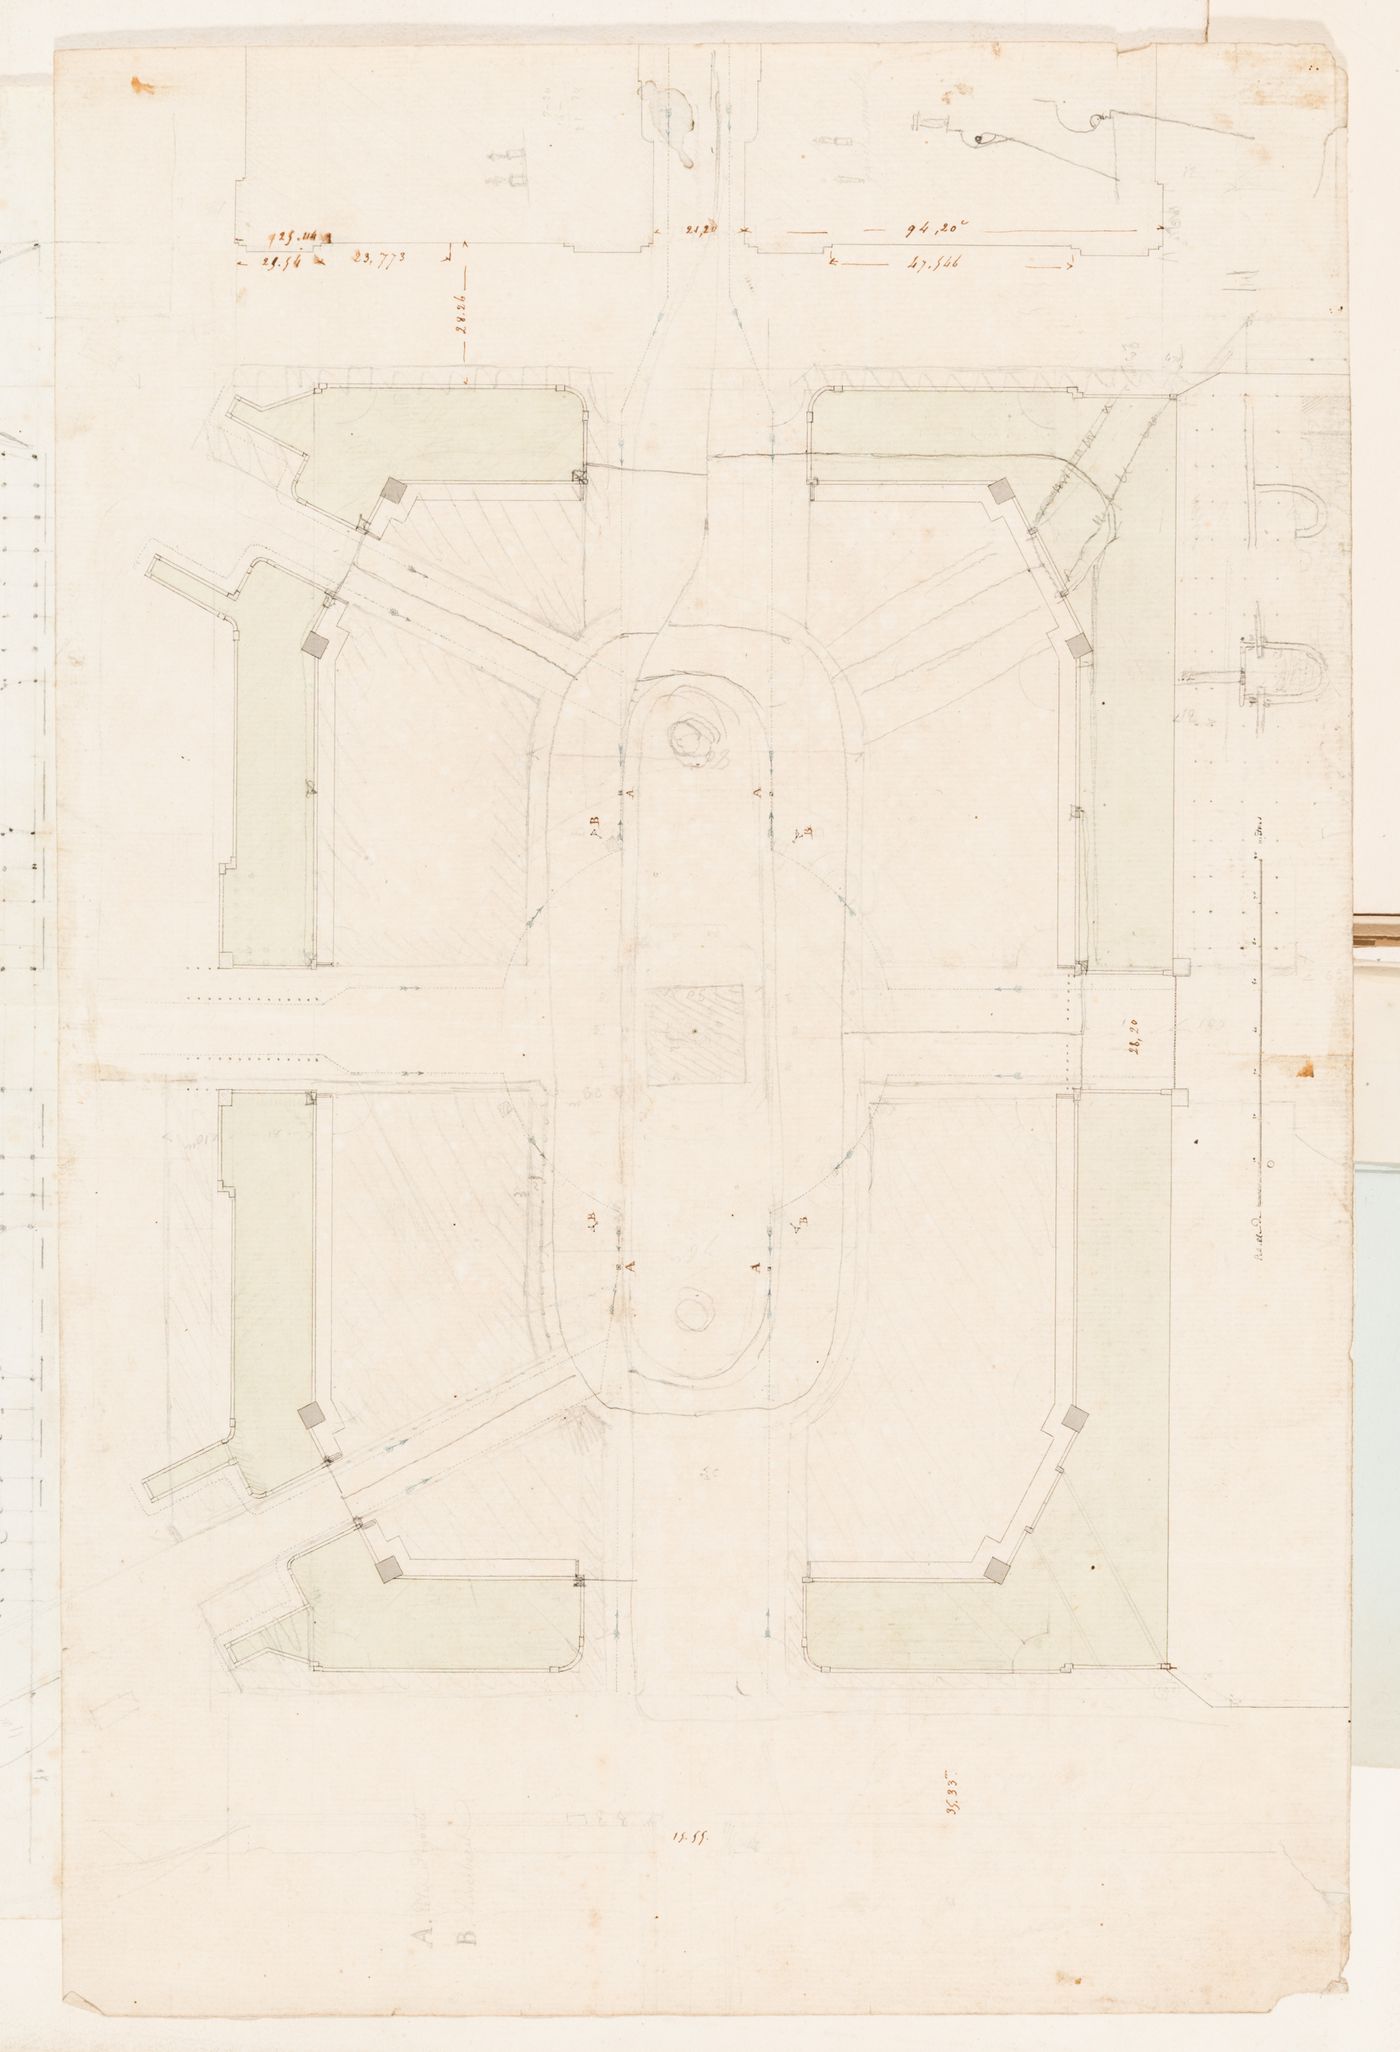 Plan for an urban square, probably place Louis XV